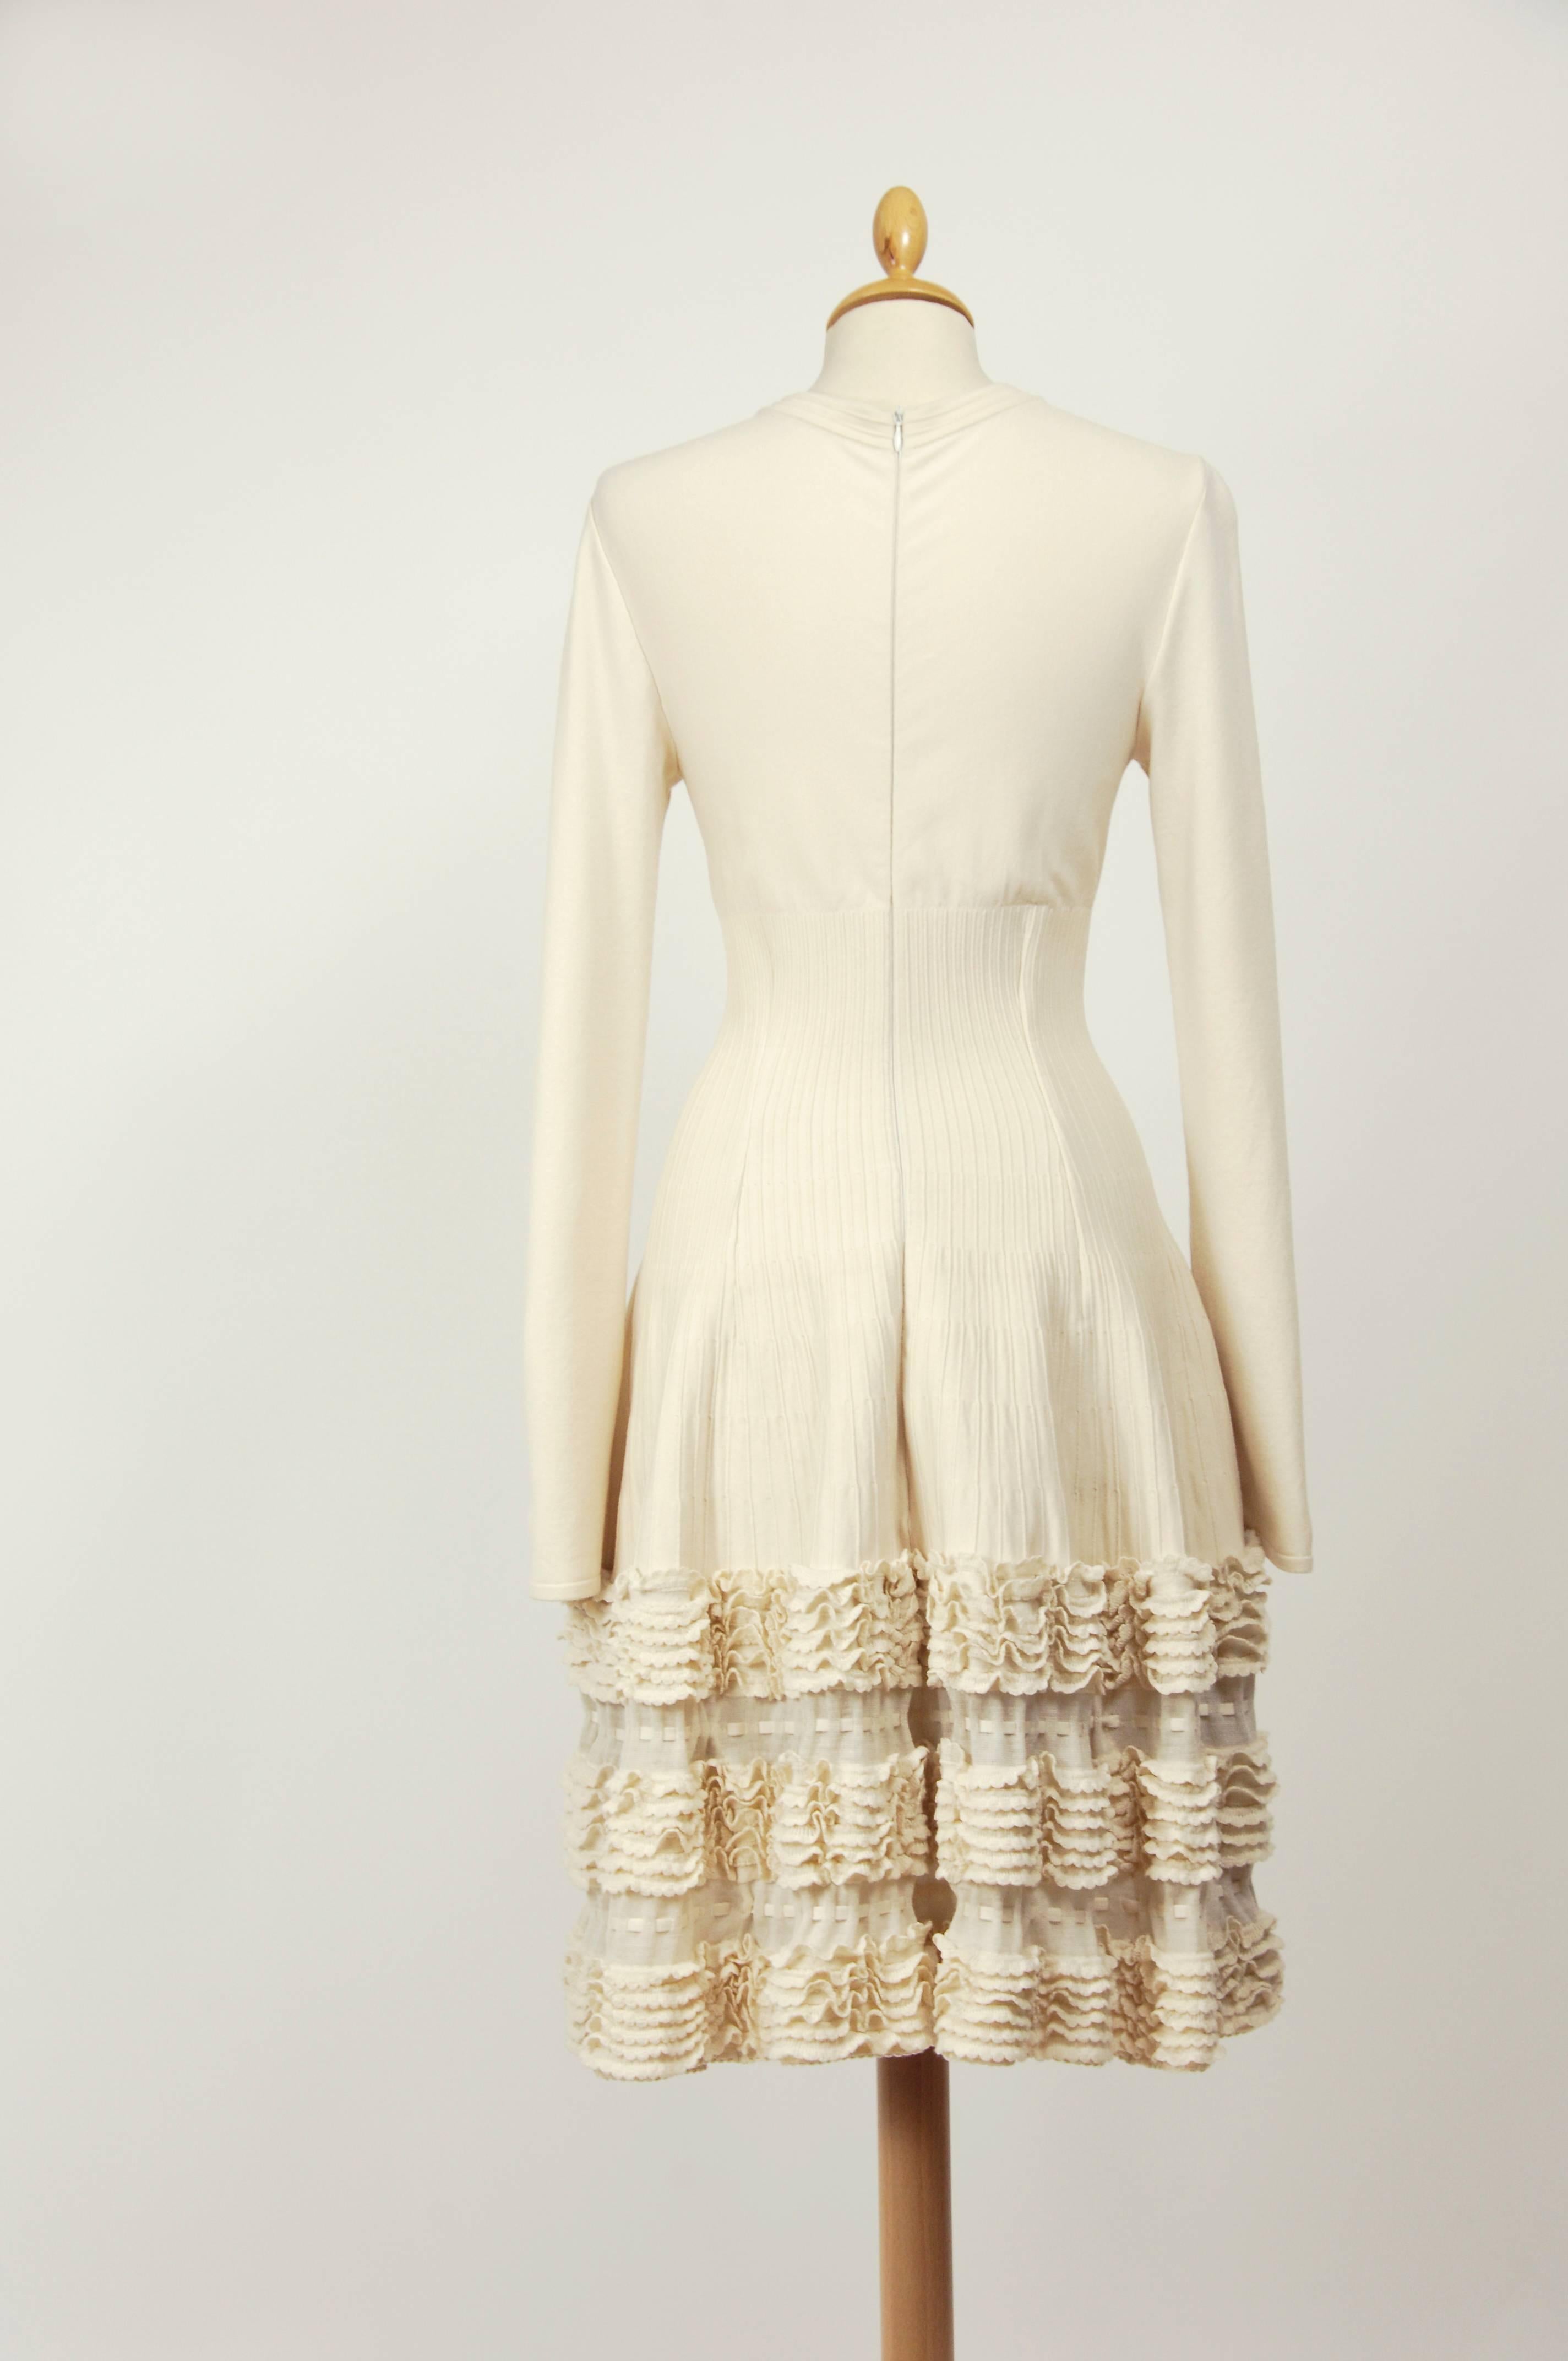 Alaïa Wool Knit Stretch Ruffle Dress In Good Condition For Sale In Milan, Italy